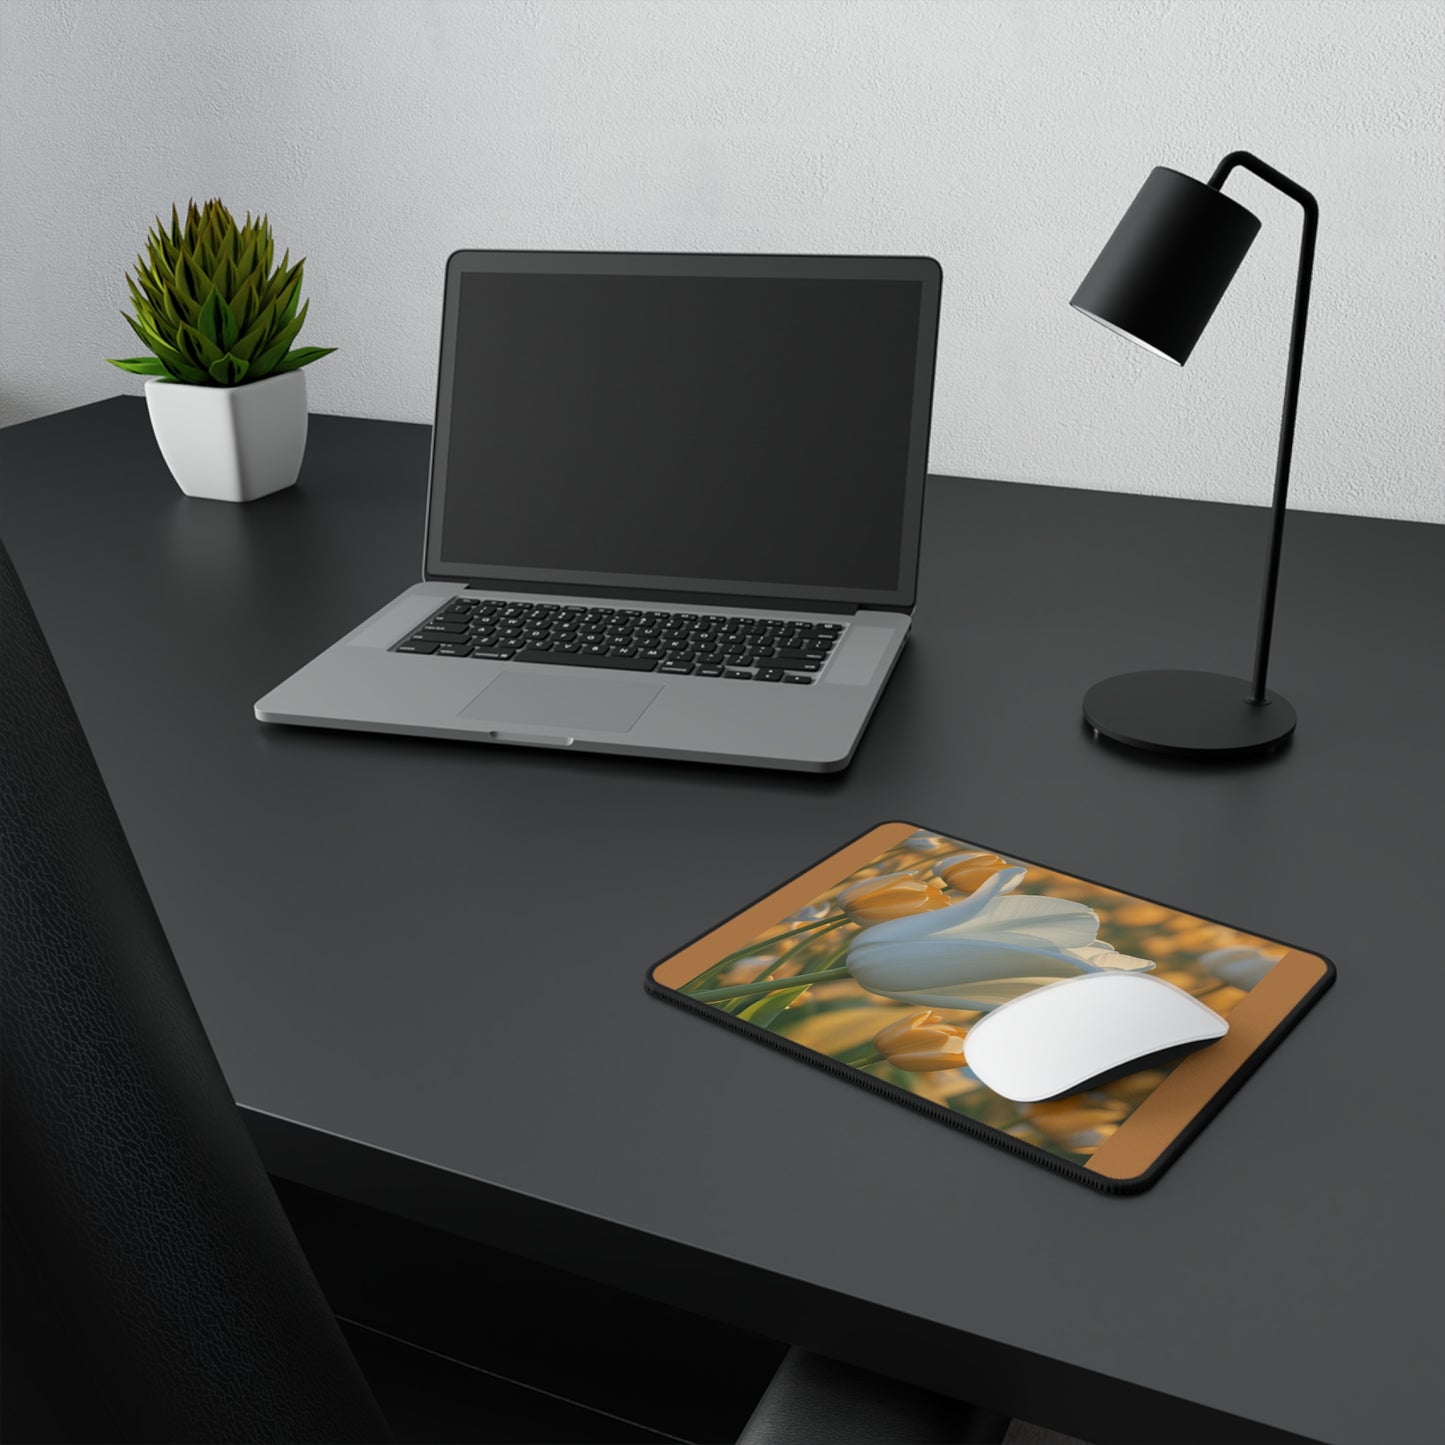 White Flower Tulip Non-Slip Mouse Pad (SP Photography Collection) BROWN